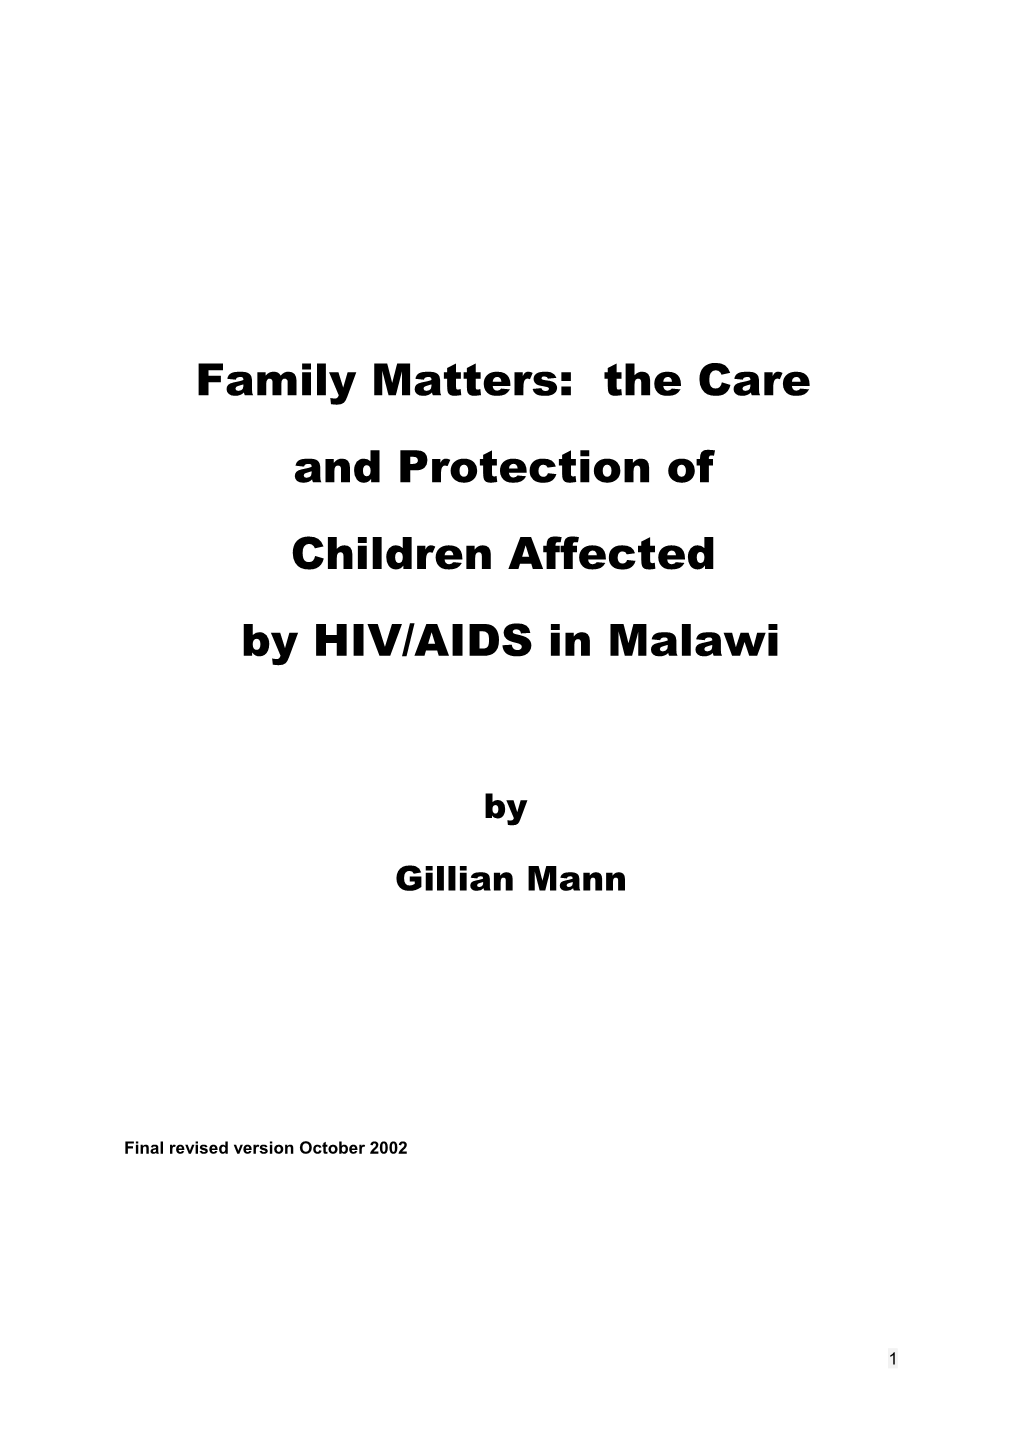 Case Study on the Care and Protection of Children Affected by HIV/AIDS in Malawi